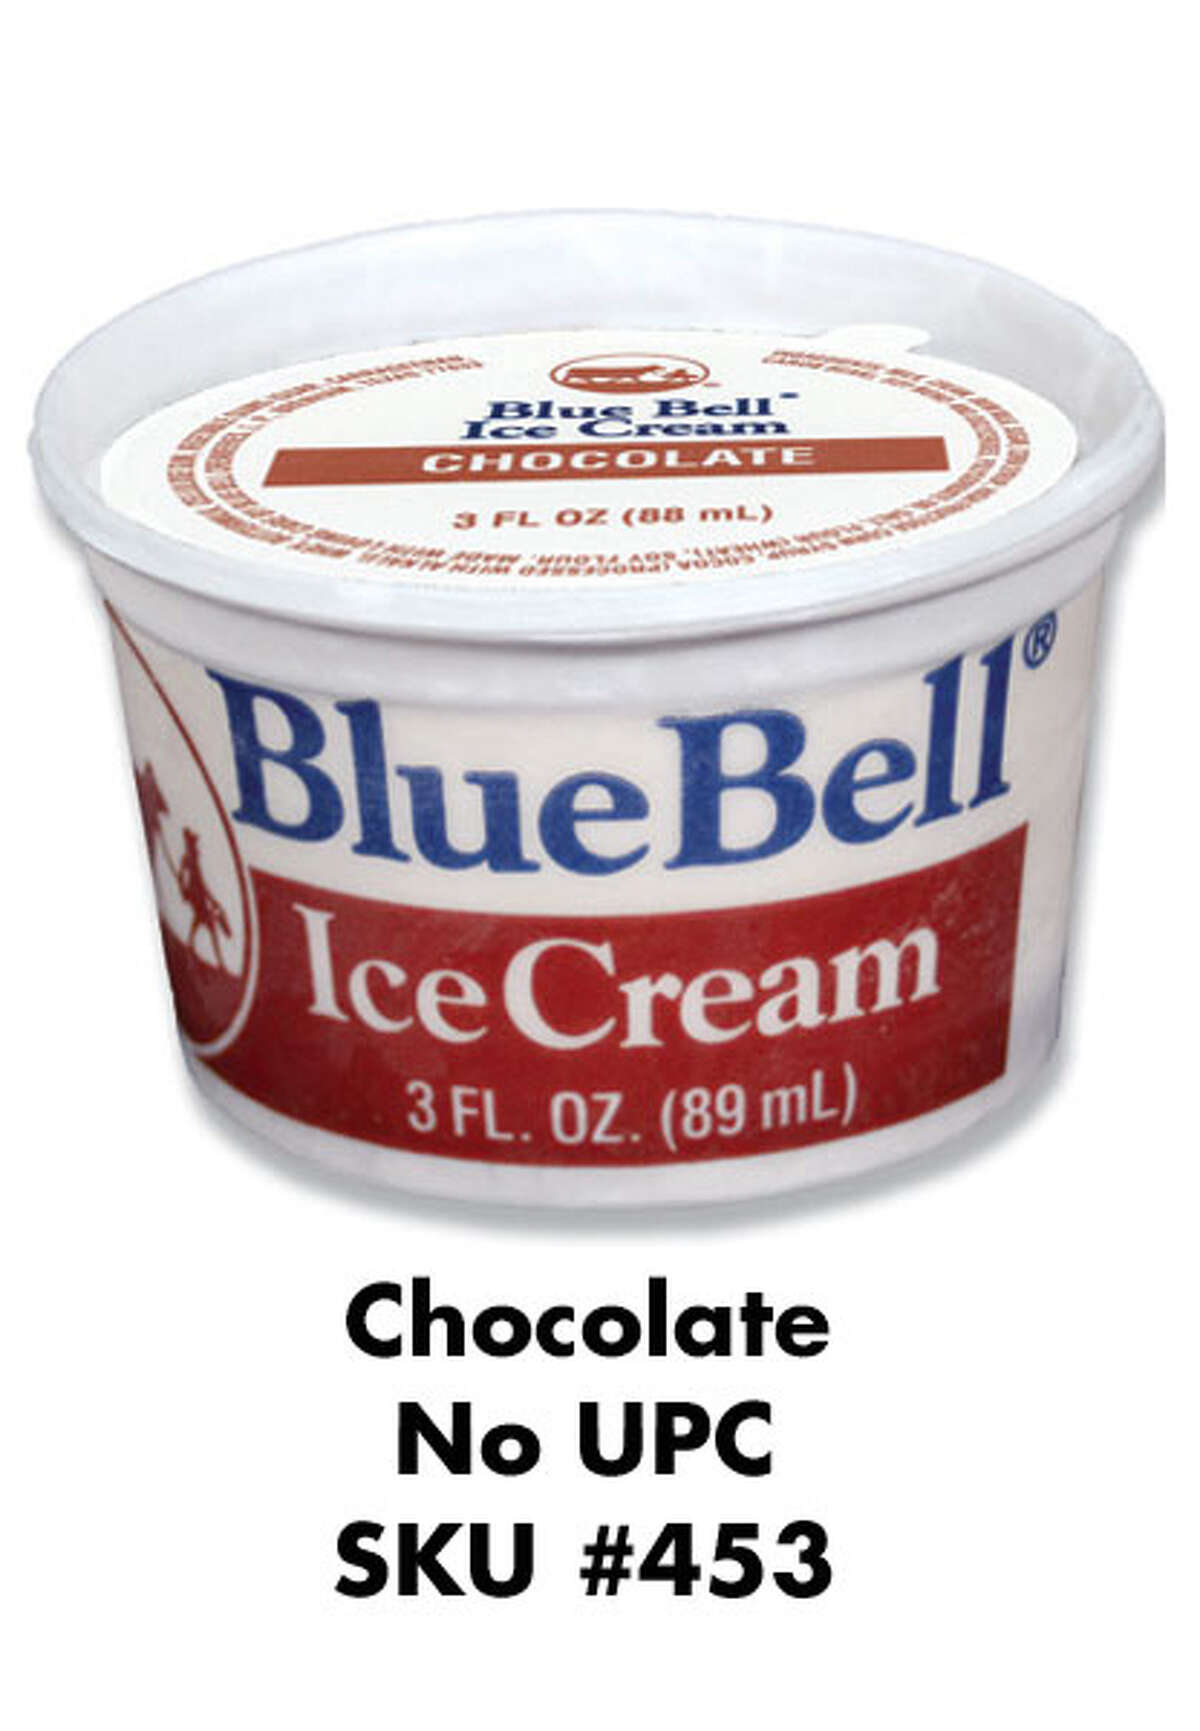 These items have been recalled by Blue Bell Creameries in Brenham, Texas as part of a listeria outbreak.